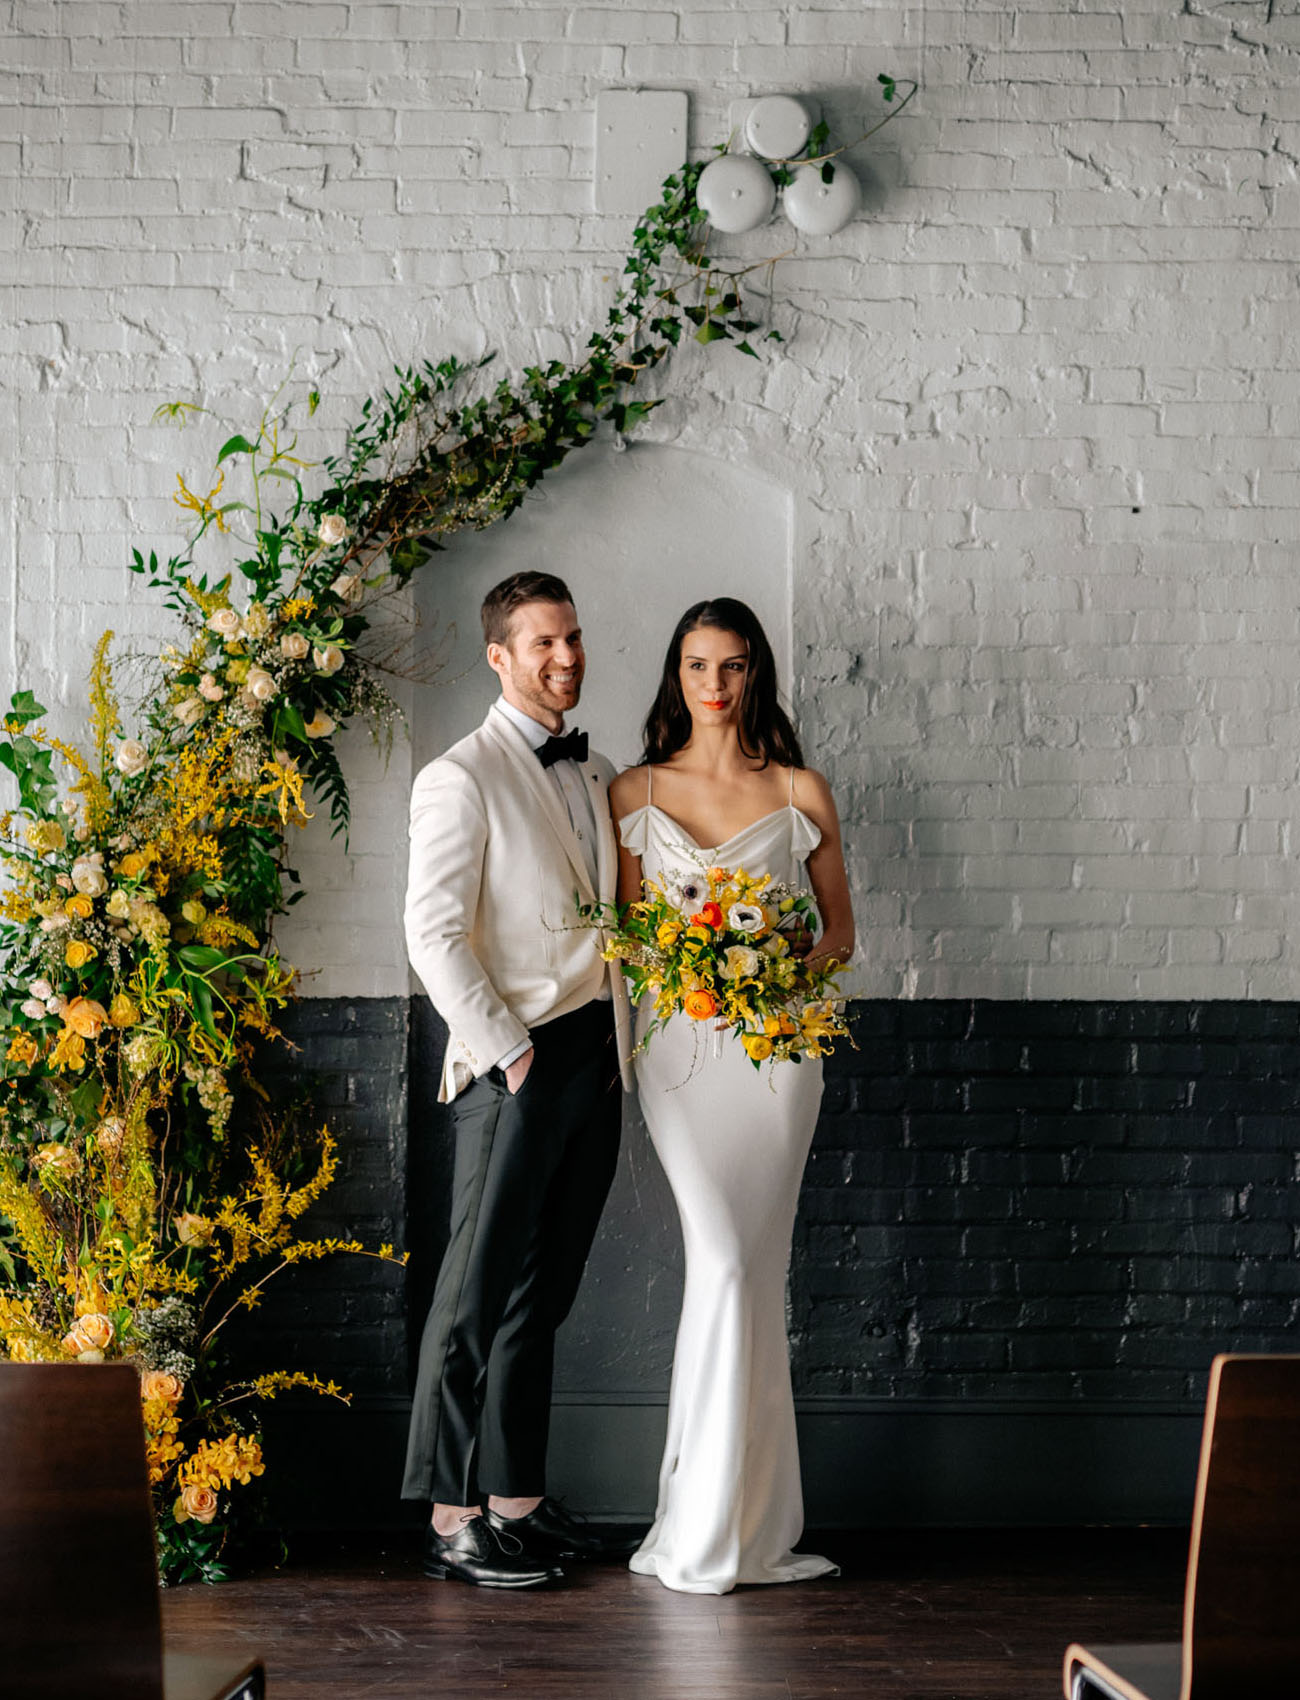 Centered on Citrus: Bright Hues Meets Industrial Wedding Inspiration